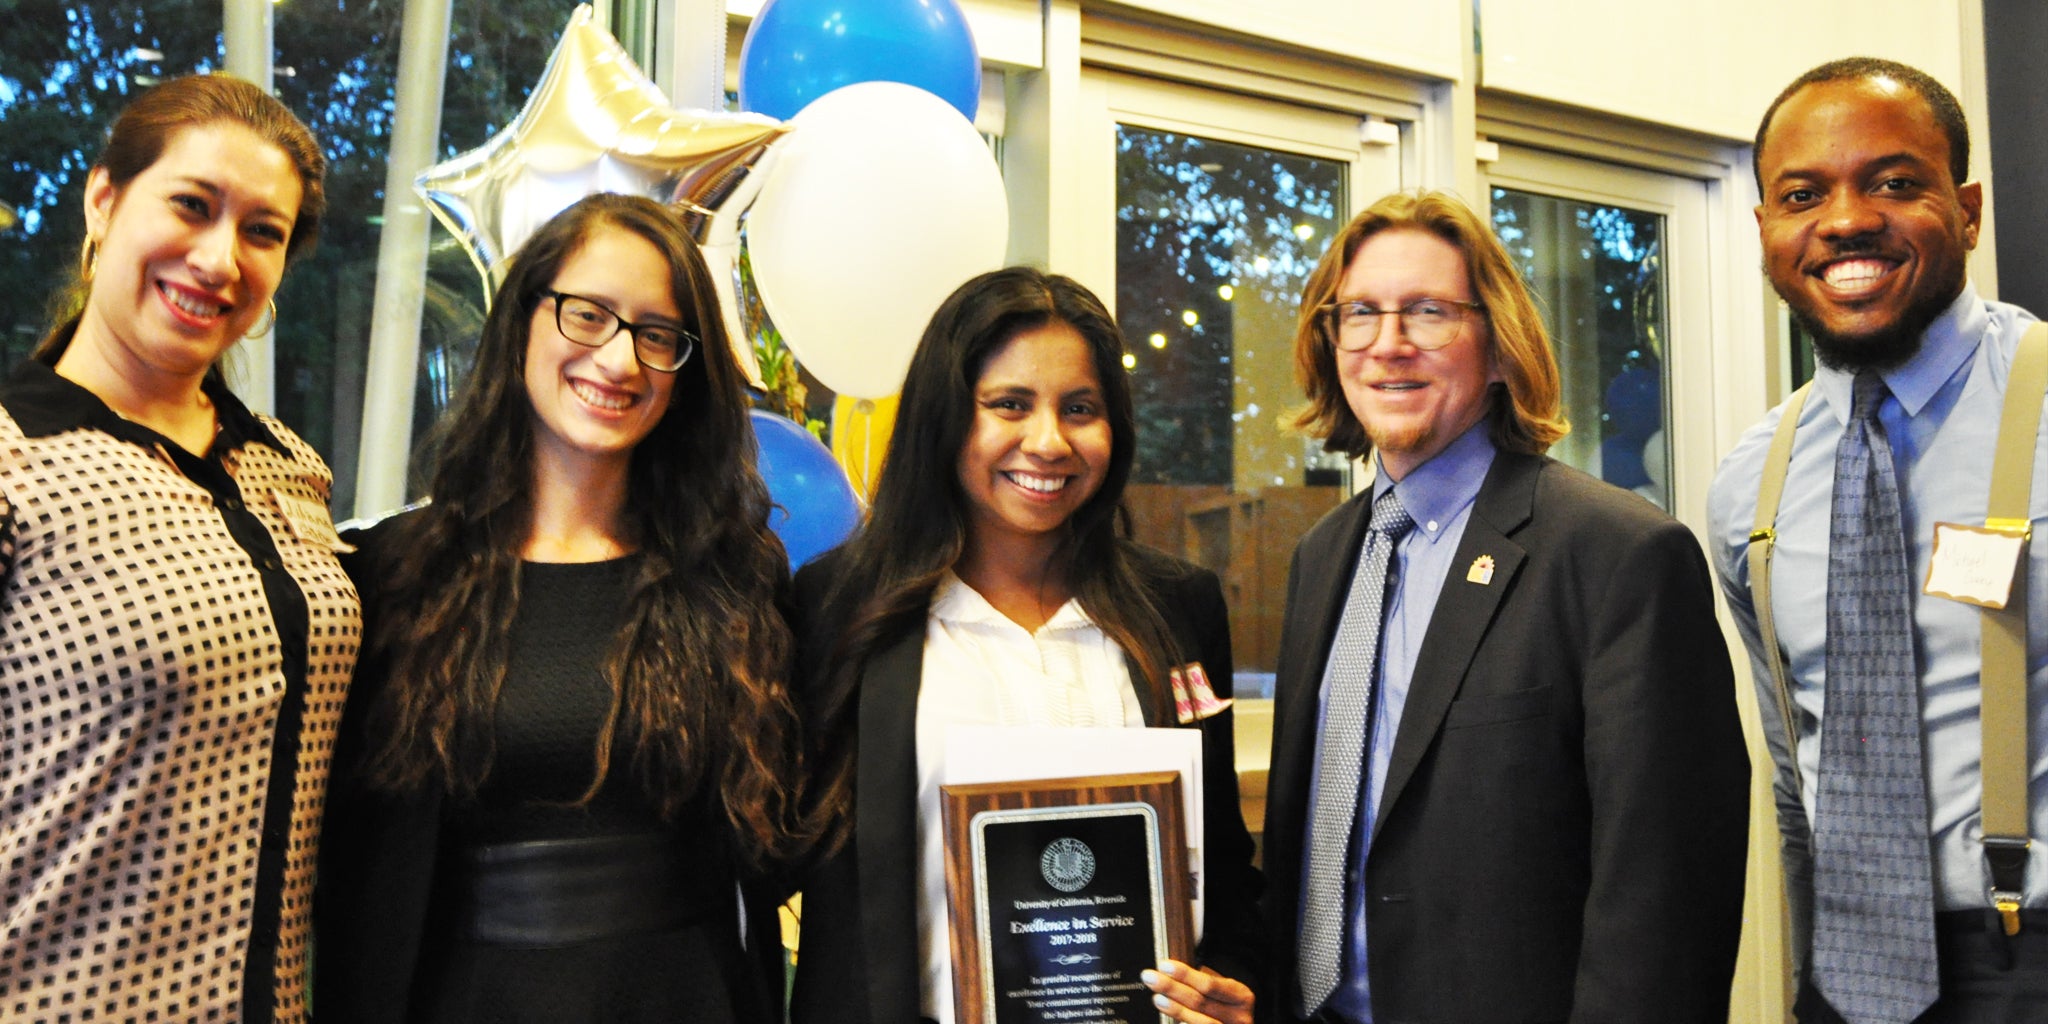 Student volunteers pose with UCR faculty and staff members during an awards ceremony.